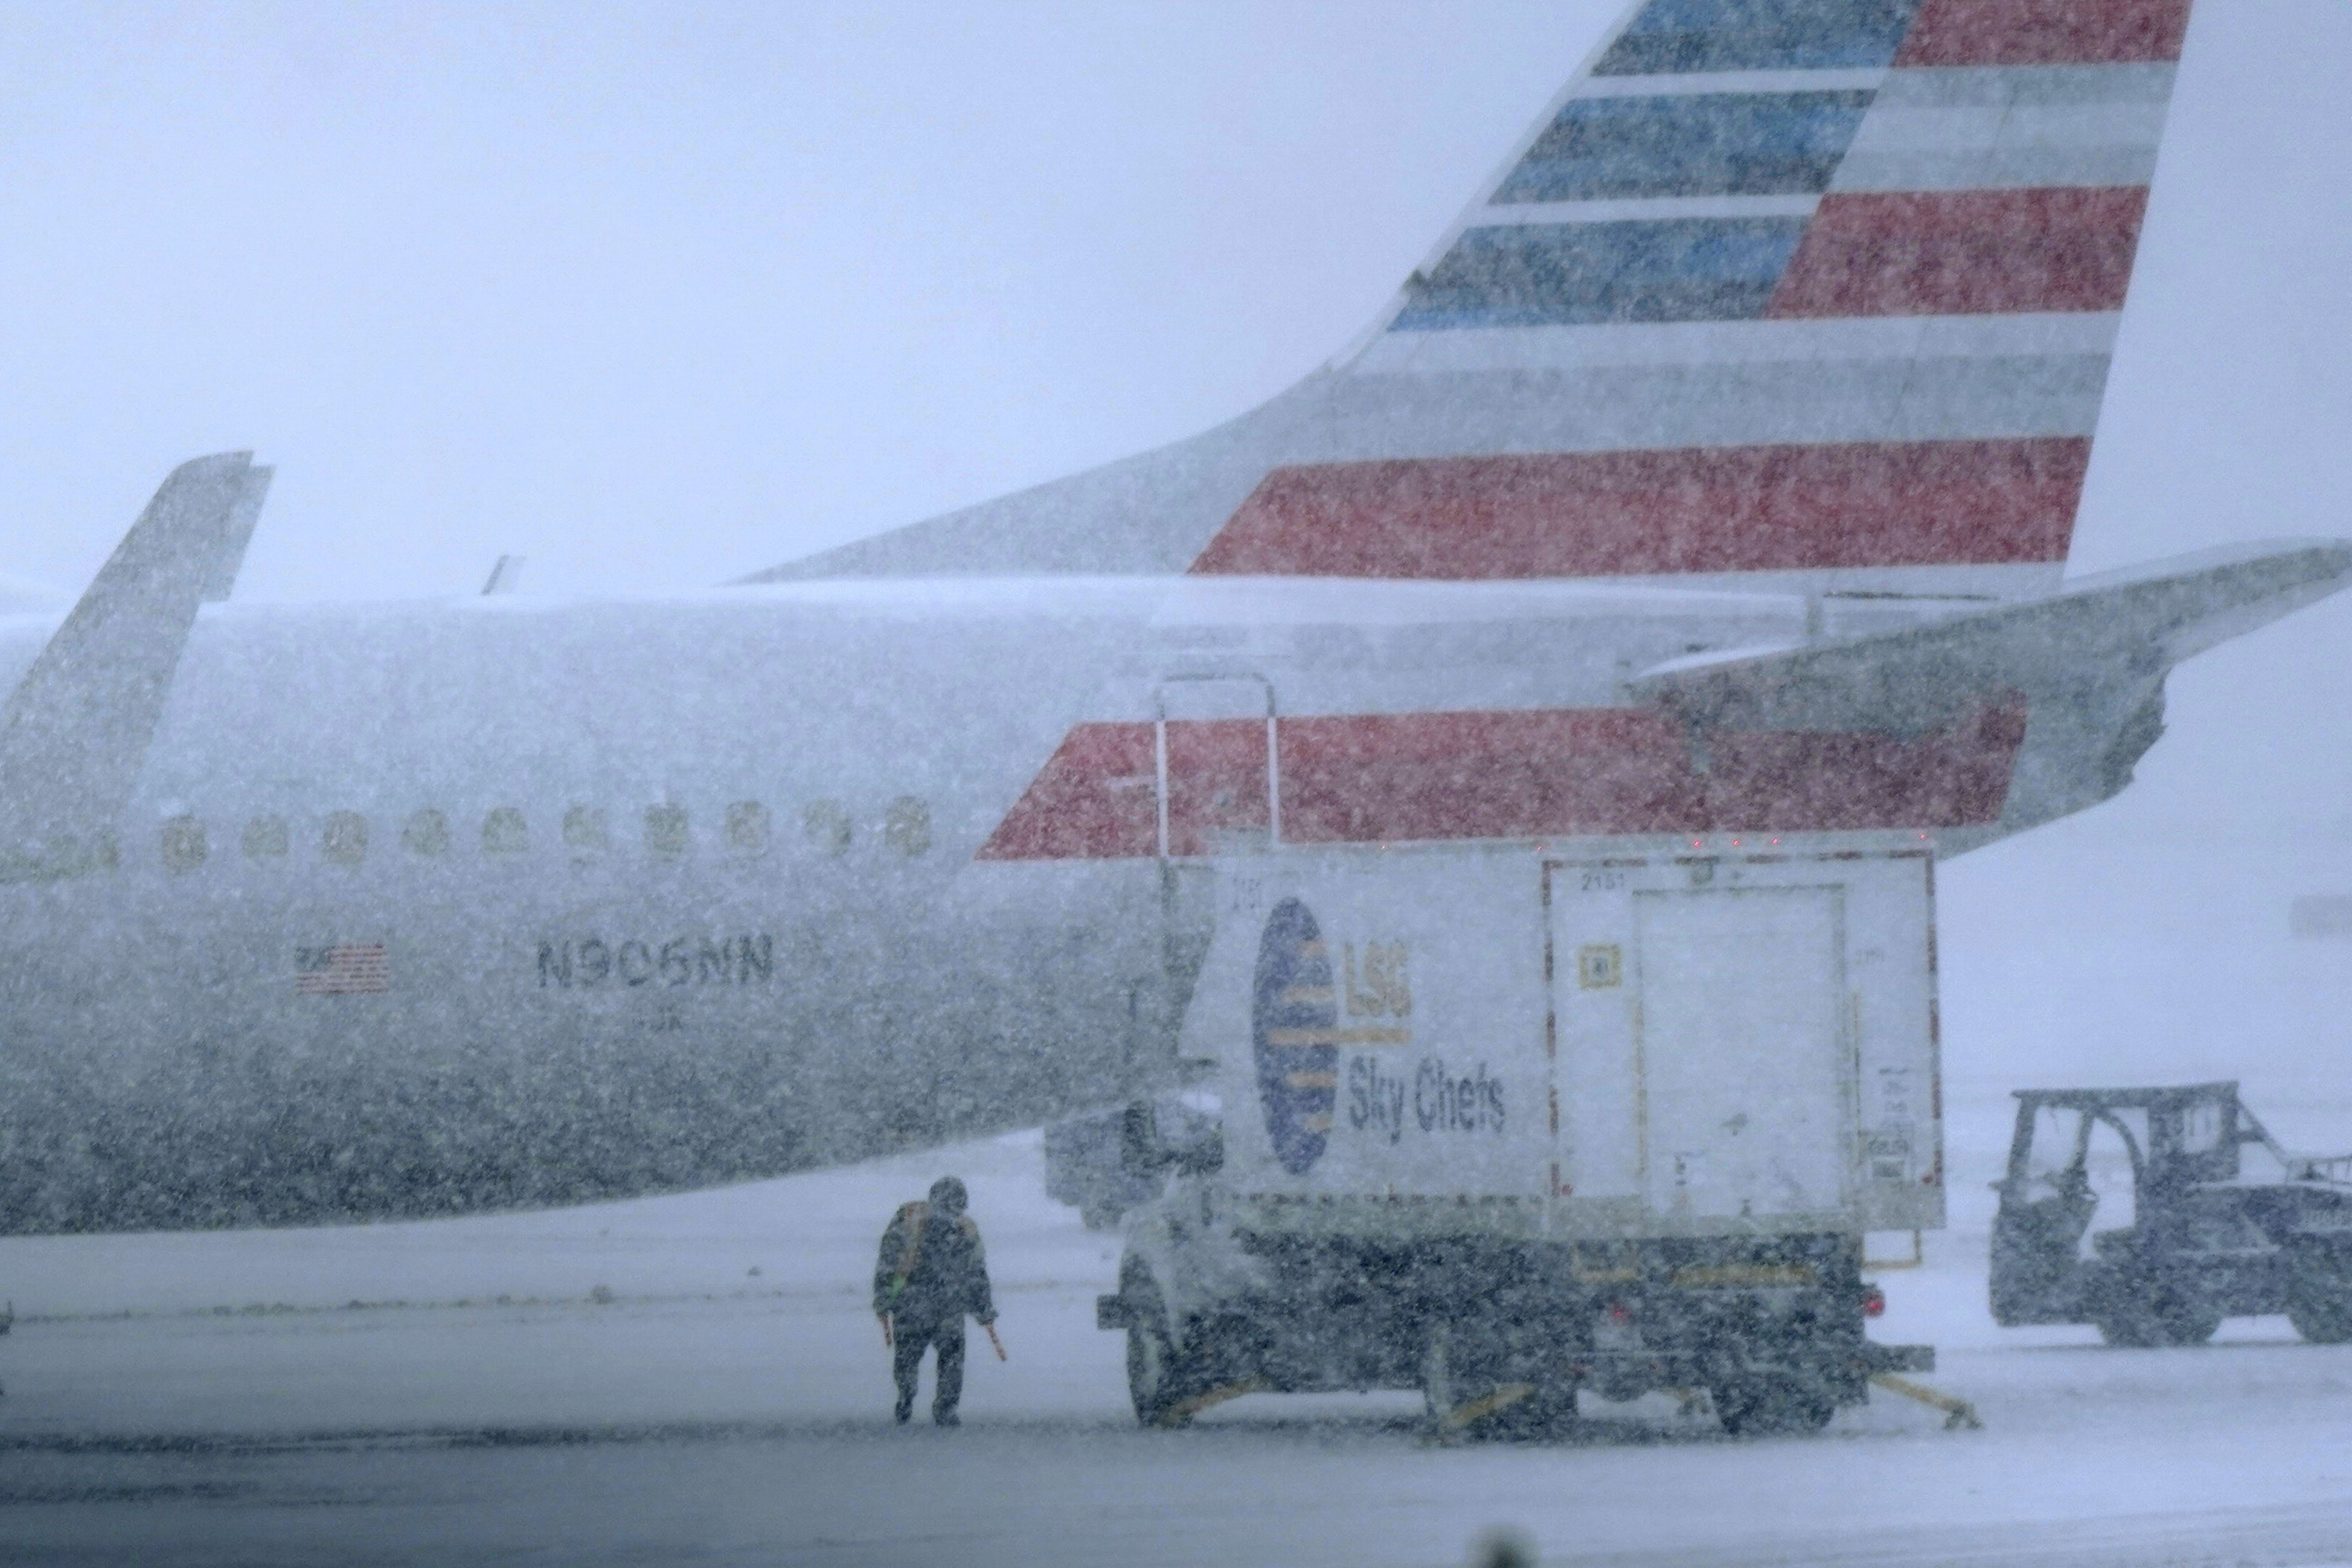 Snow falls on a ground crew working outside a parked plane at Dallas Fort Worth International Airport in Grapevine, Texas,  on Thursday.